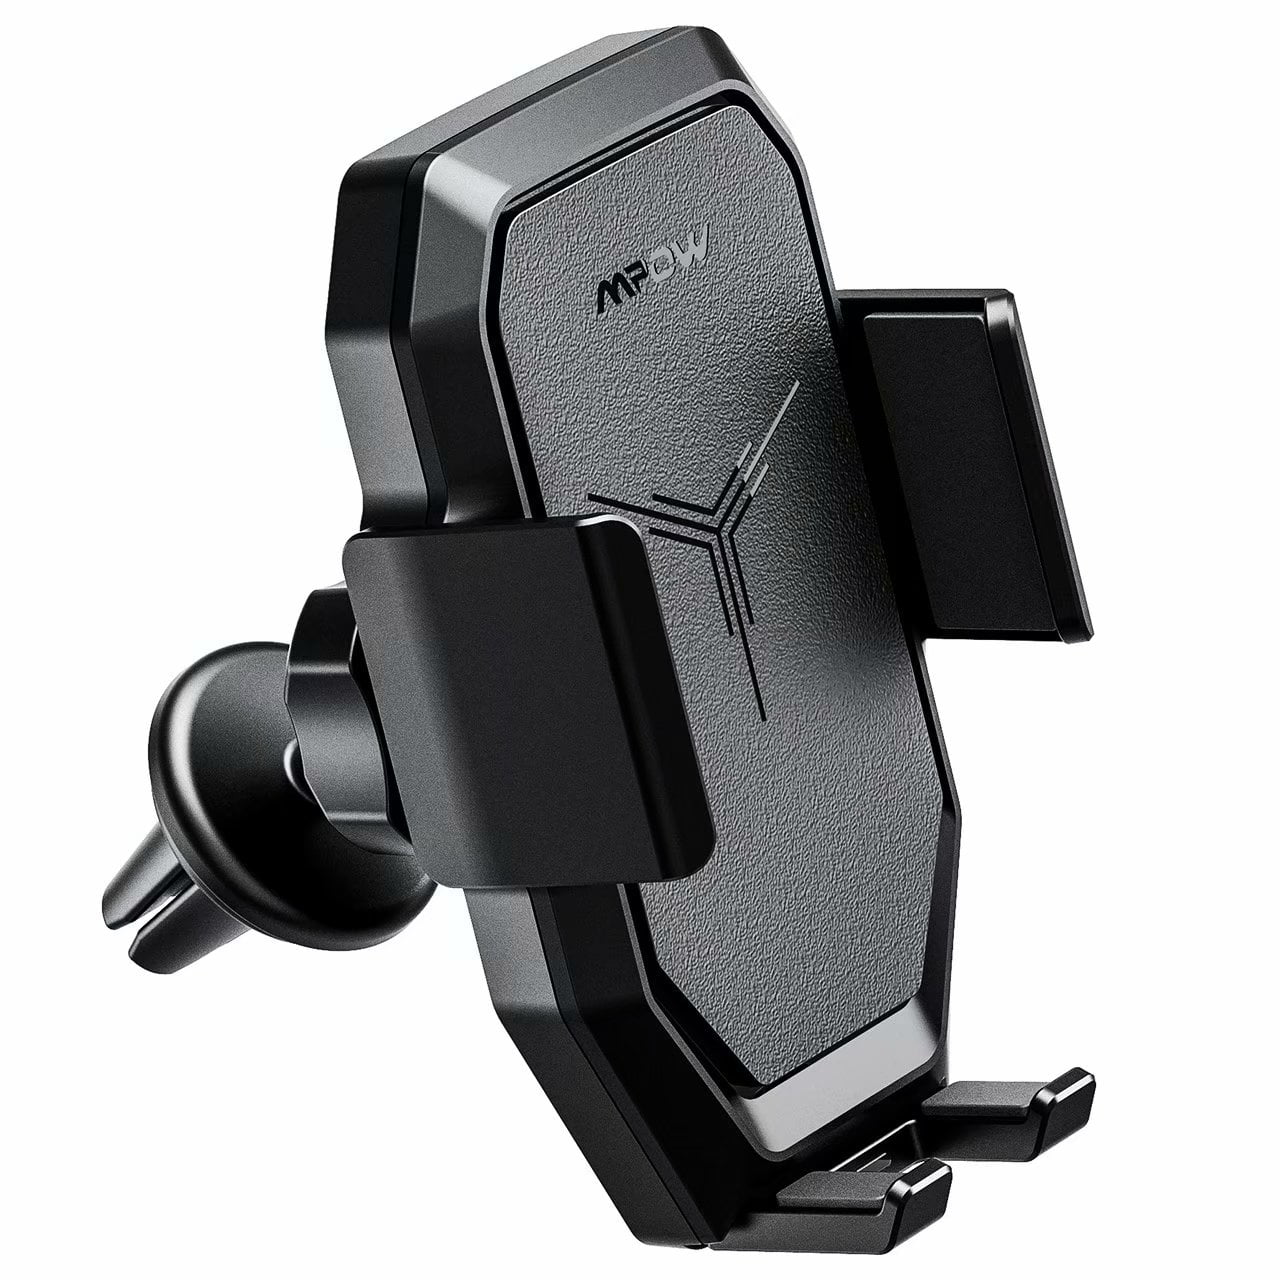 Compatible iPhone 11//11 Pro//Xs Max//XS//XR//X//8 10W//7.5W Qi Fast Charging Phone Holder for Air Vent and CD Slot 2-in-1 Car Mount with Dual Vent Clips Samsung Galaxy Mpow Wireless Car Charger Mount